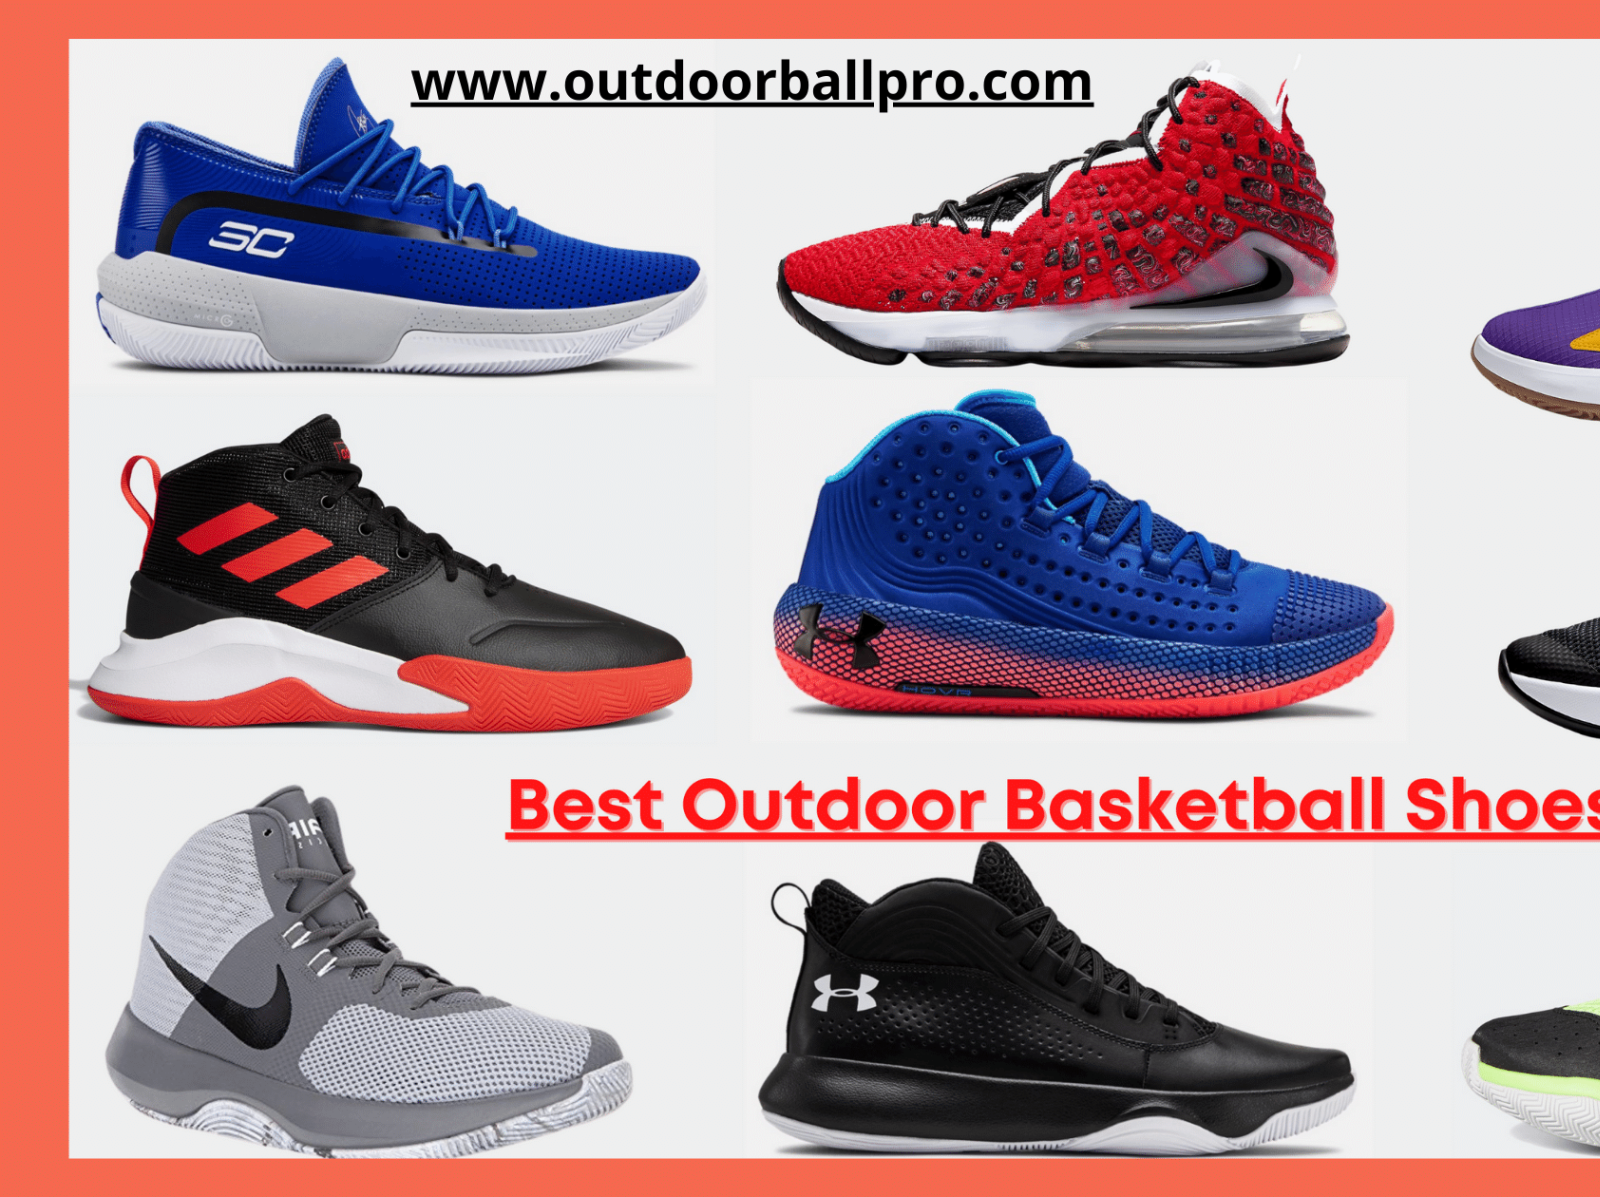 best outdoor basketball shoes by Outdoor Ball Pro on Dribbble